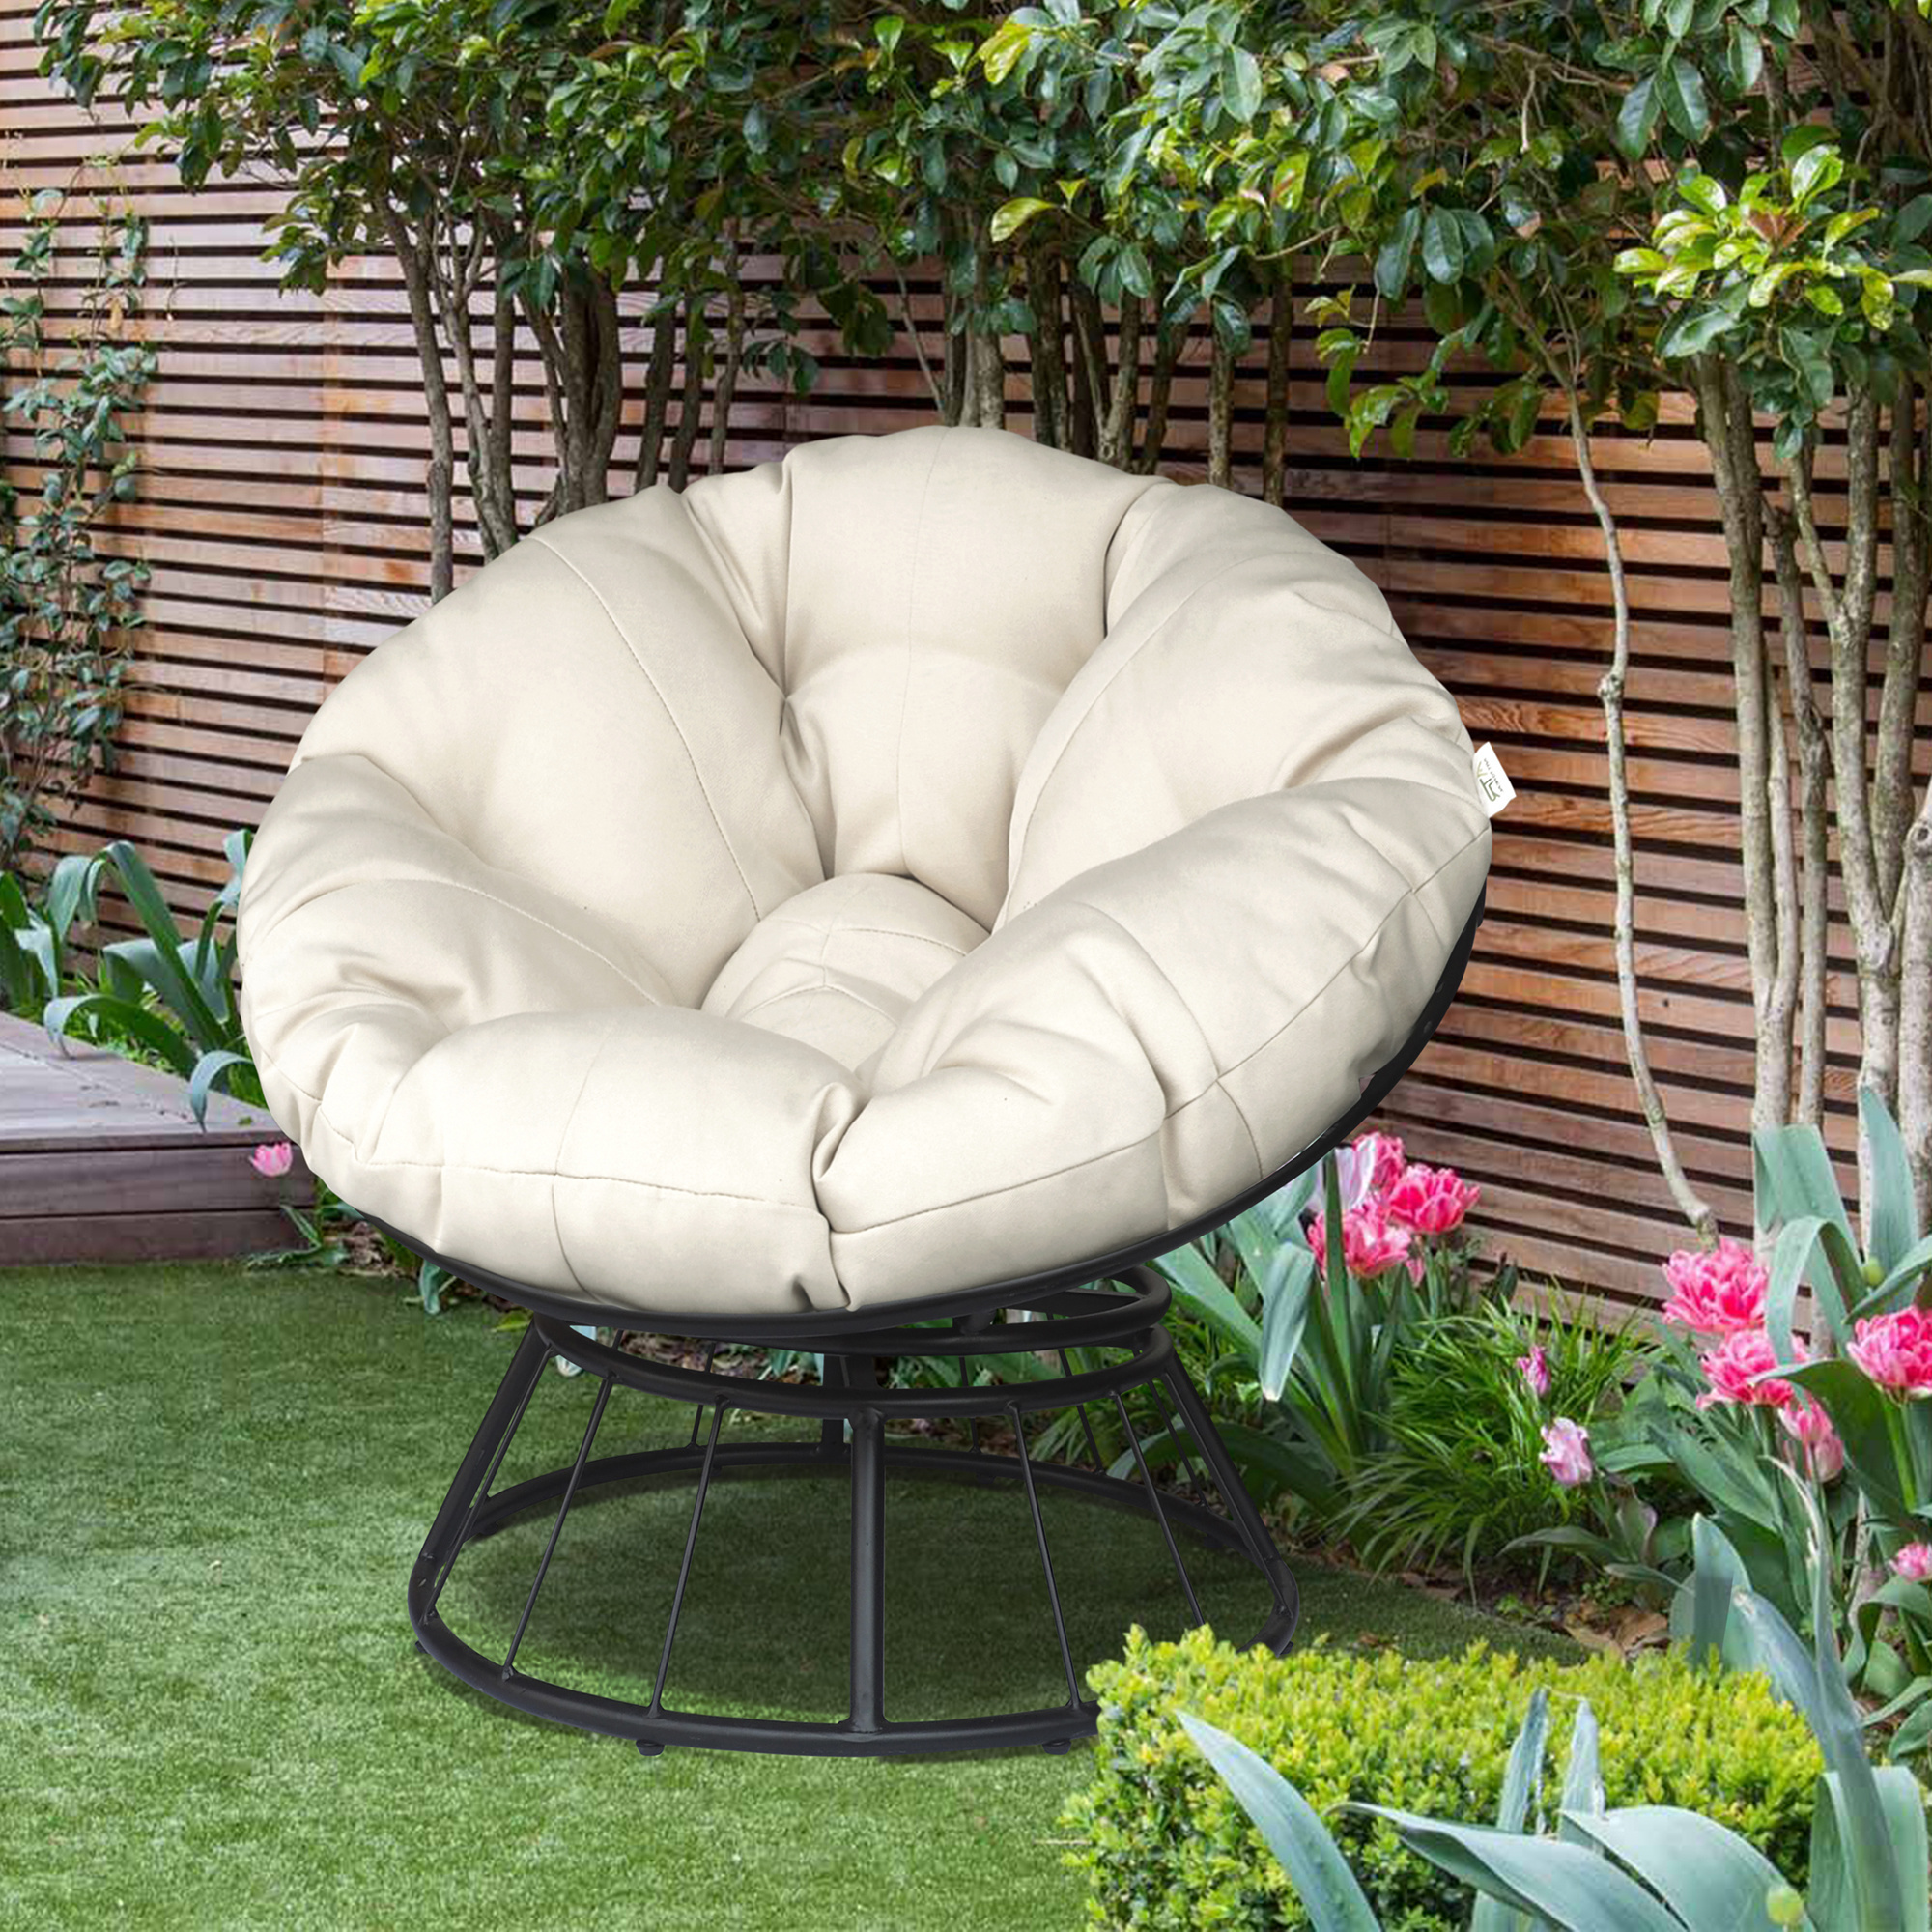 360-degree Swivel base Outdoor Papasan Chair with Beige Cu،on  and Durable Frame